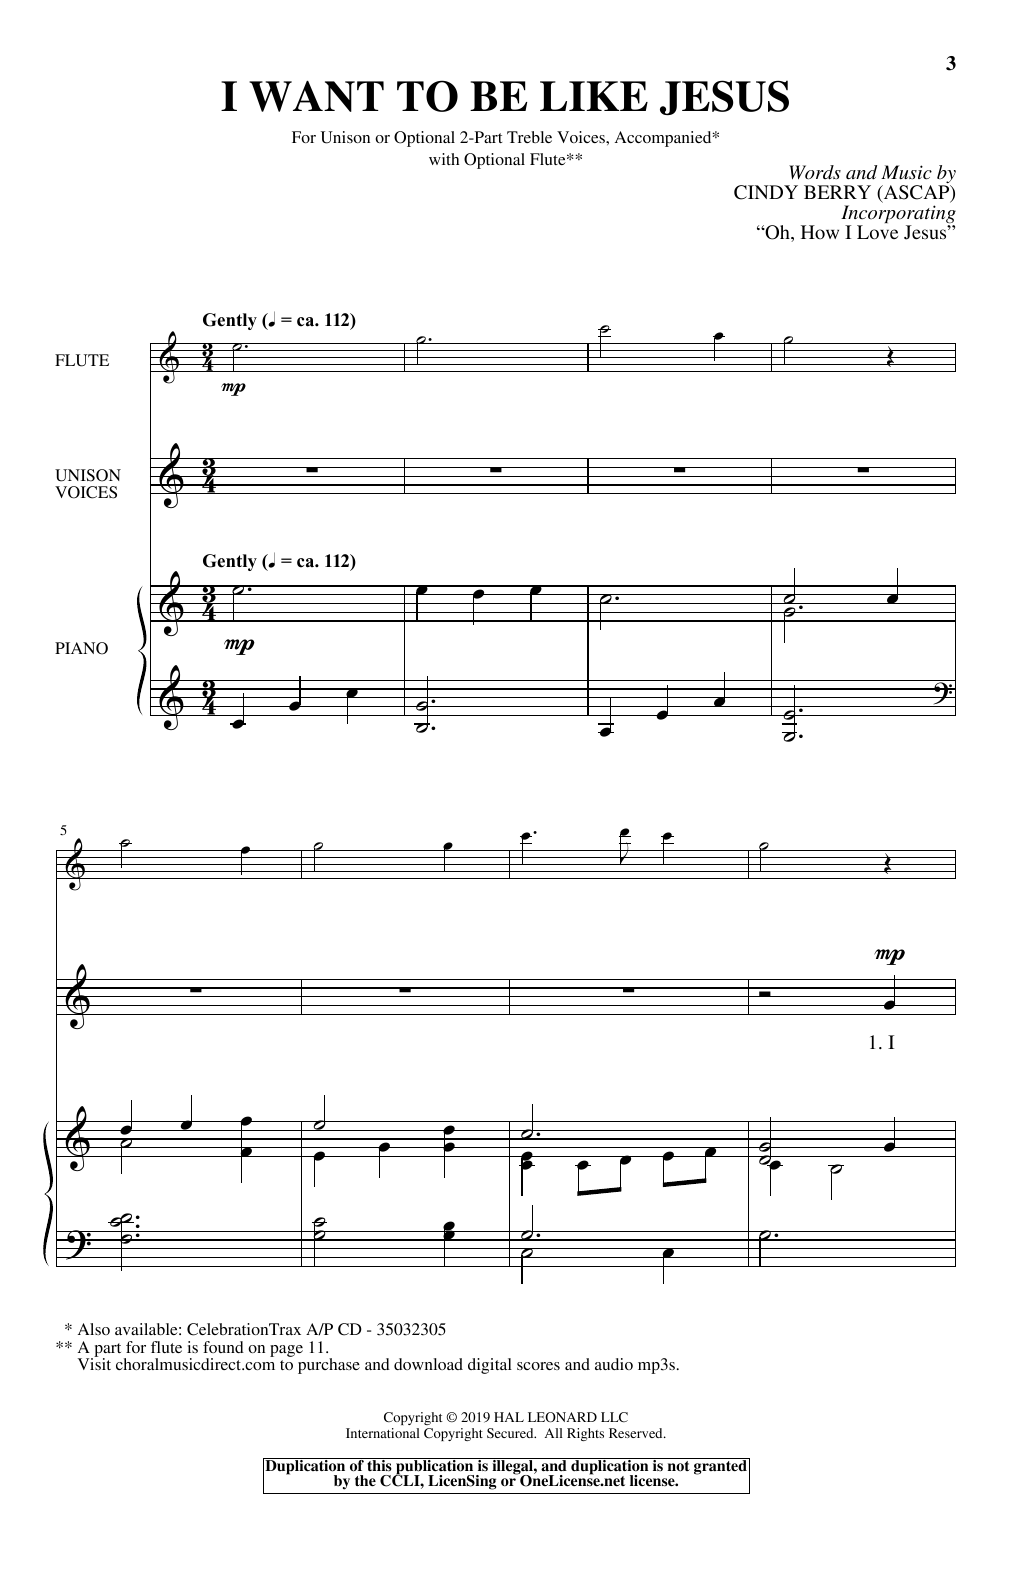 Download Cindy Berry I Want To Be Like Jesus Sheet Music